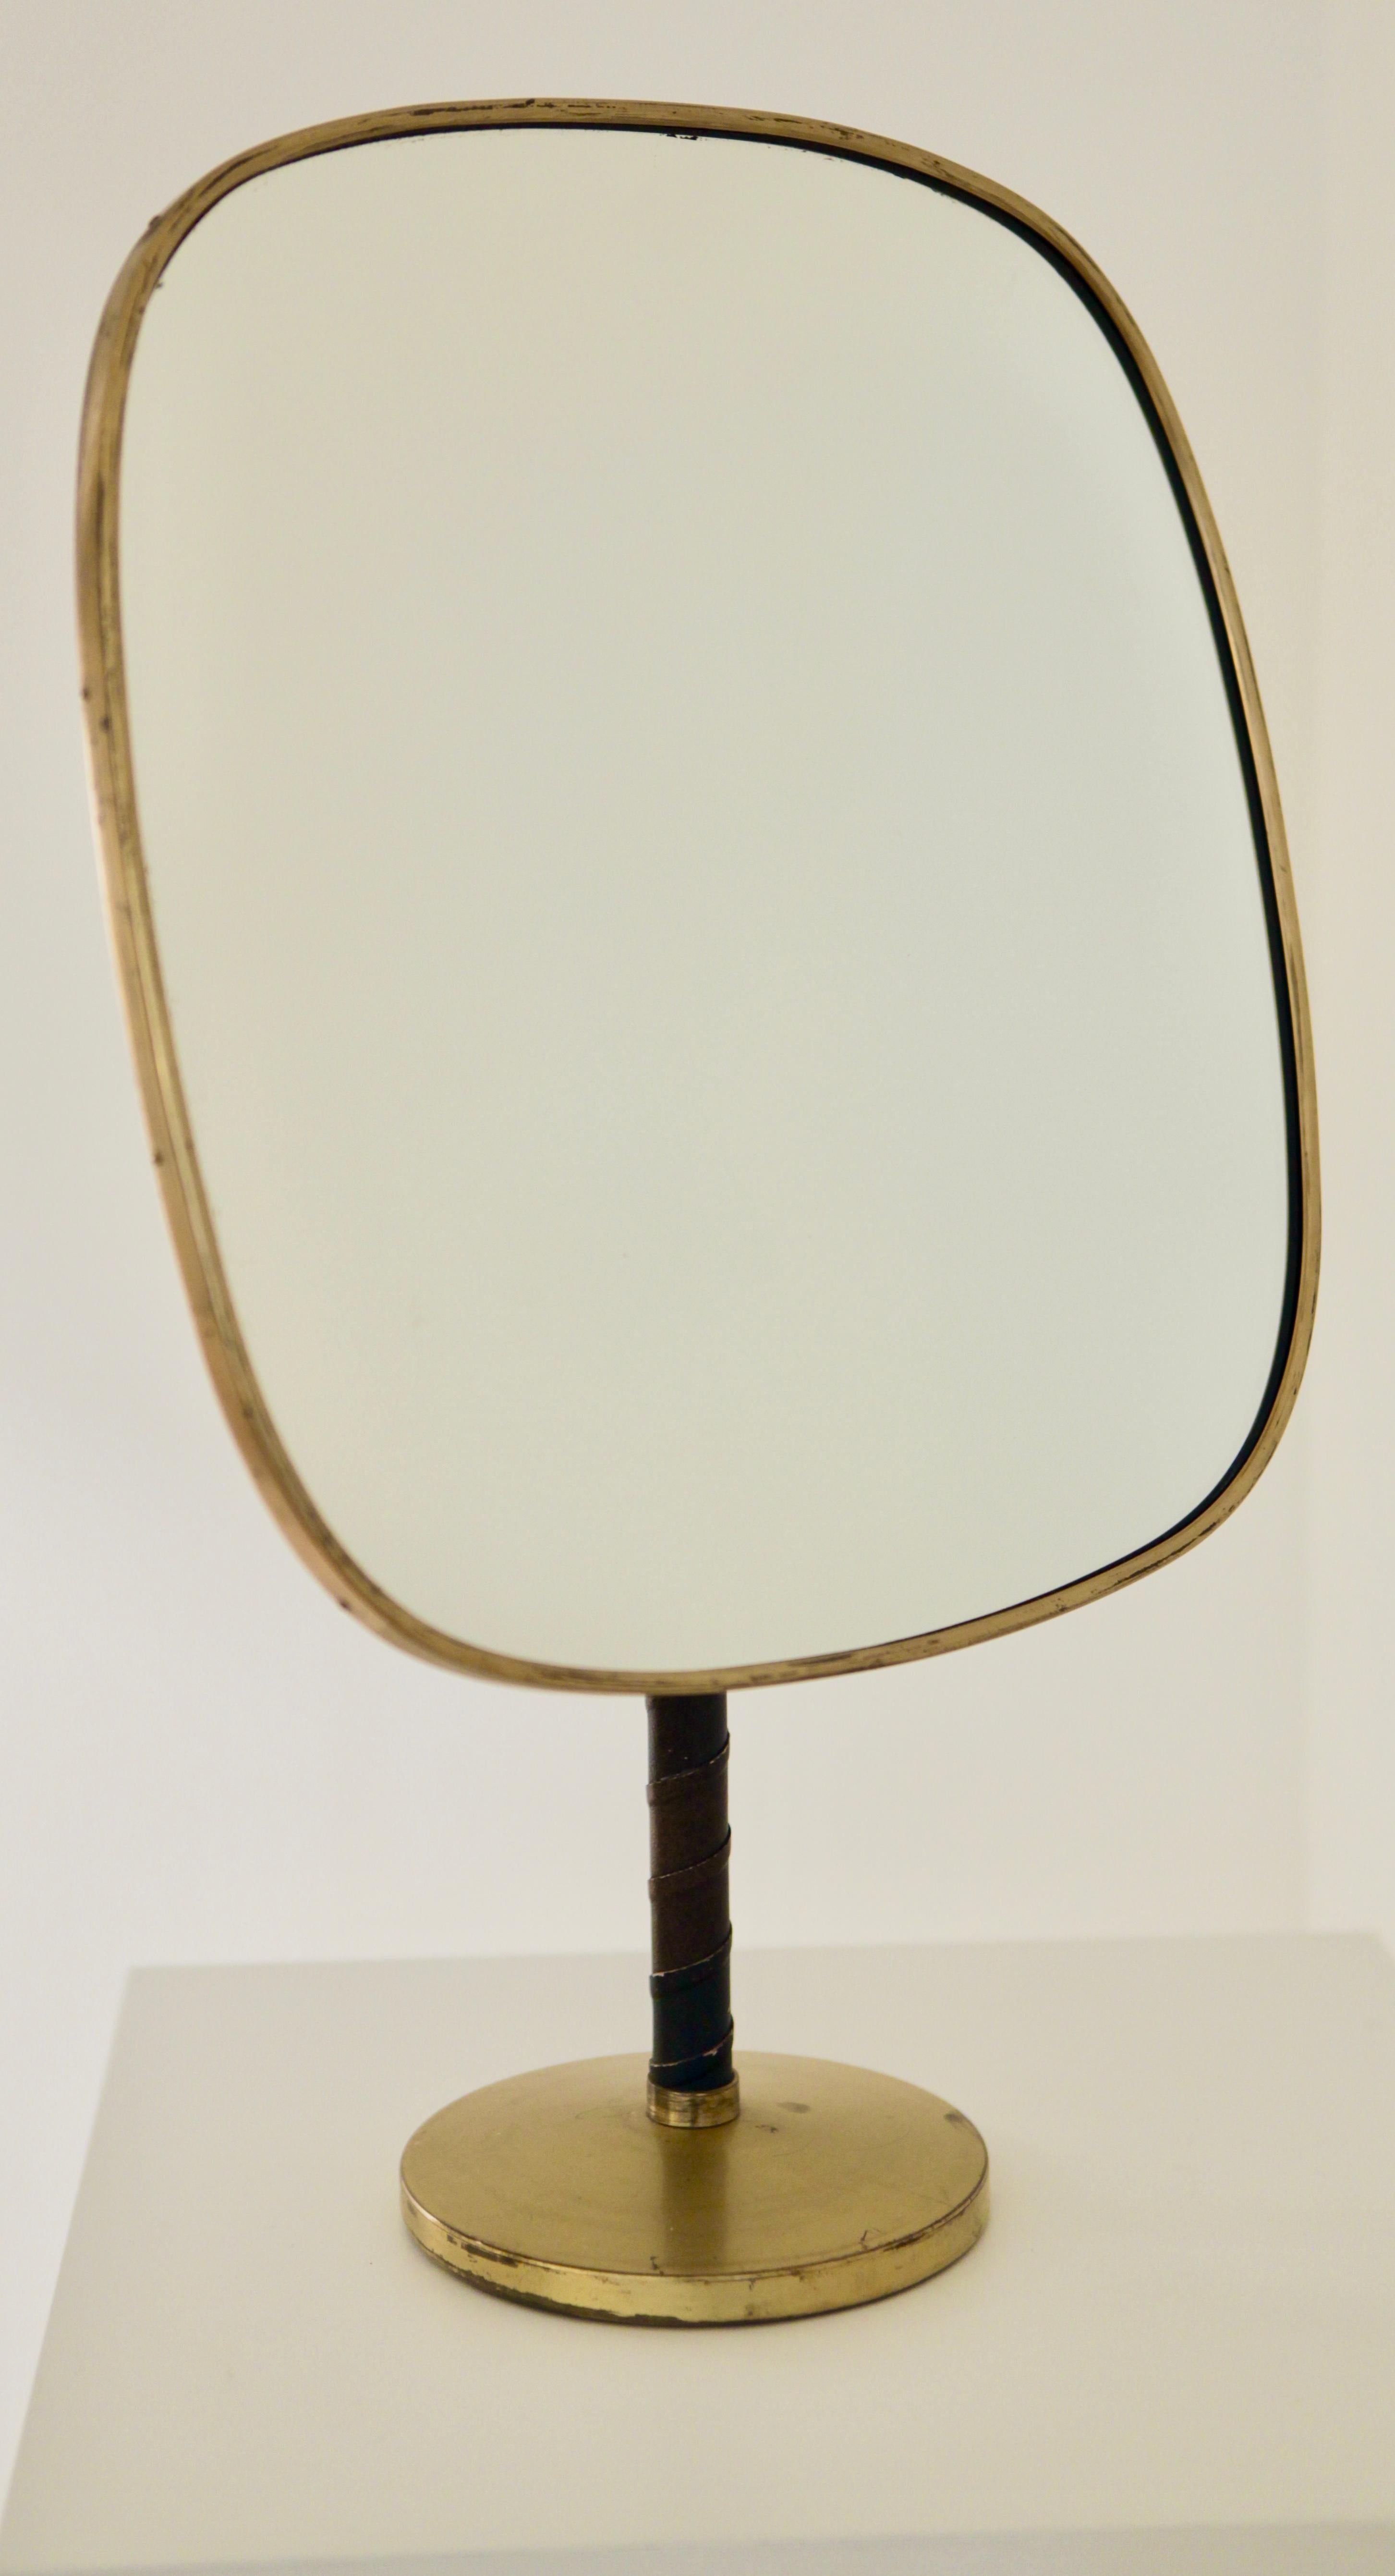 Large and rare table mirror designed by Josef Frank and manufactured by Nordiska Kompaniet in Stockholm.
Adjustable in height and ankle.
Mirror size: 40cm high/ 37cm wide – 15.35 inch / 14.17 inch.
Height from 49cm to 65cm adjustable – 19.29 inch